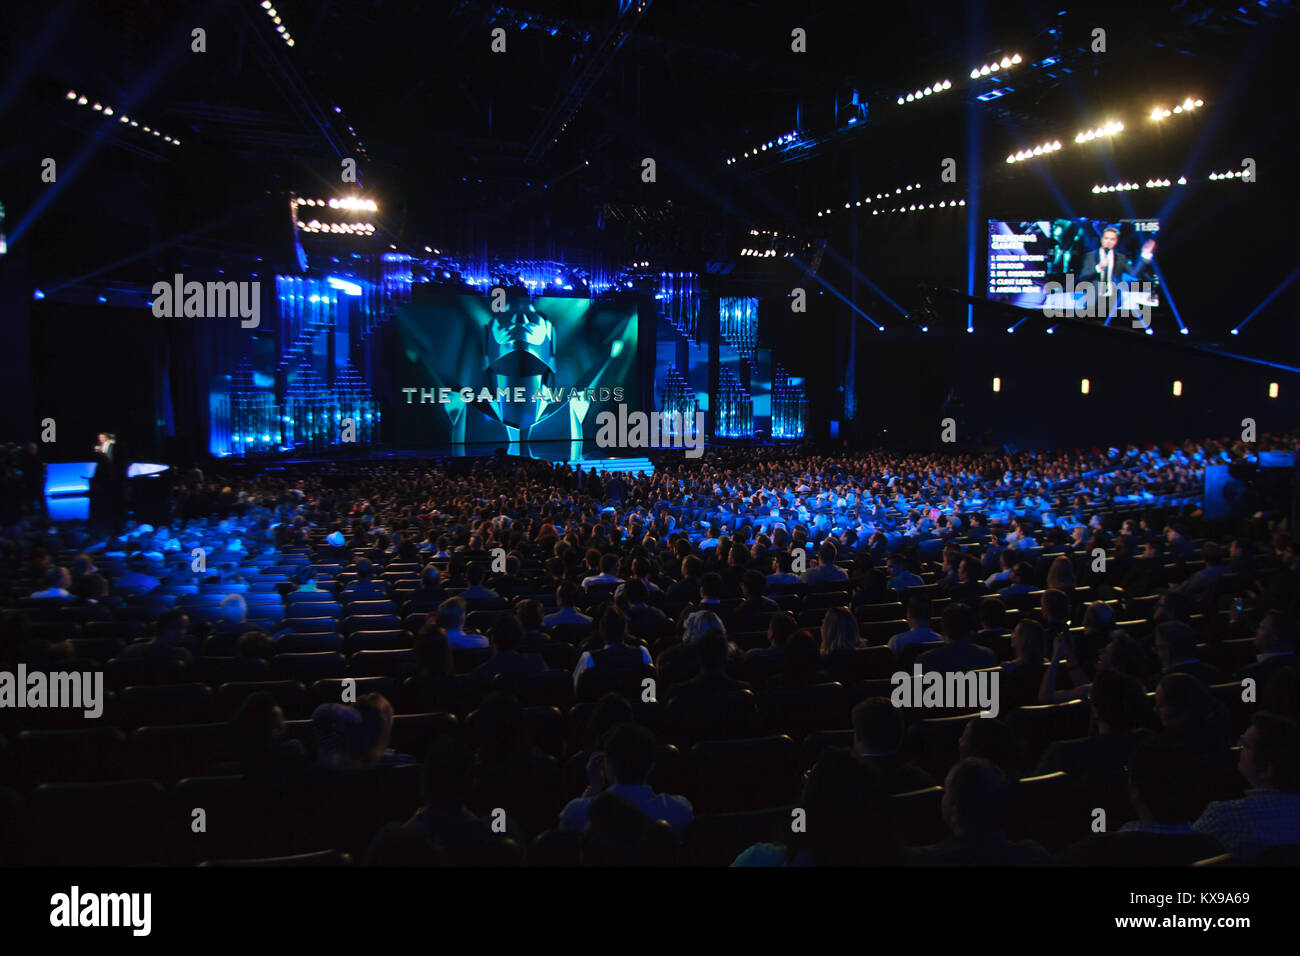 Der Game Awards 2017 bei Microsoft Theater - Show mit: Atmosphäre, In: Los Angeles, California, United States Wann: 07 Dec 2017 Credit: Tony Forte/WANN Stockfoto